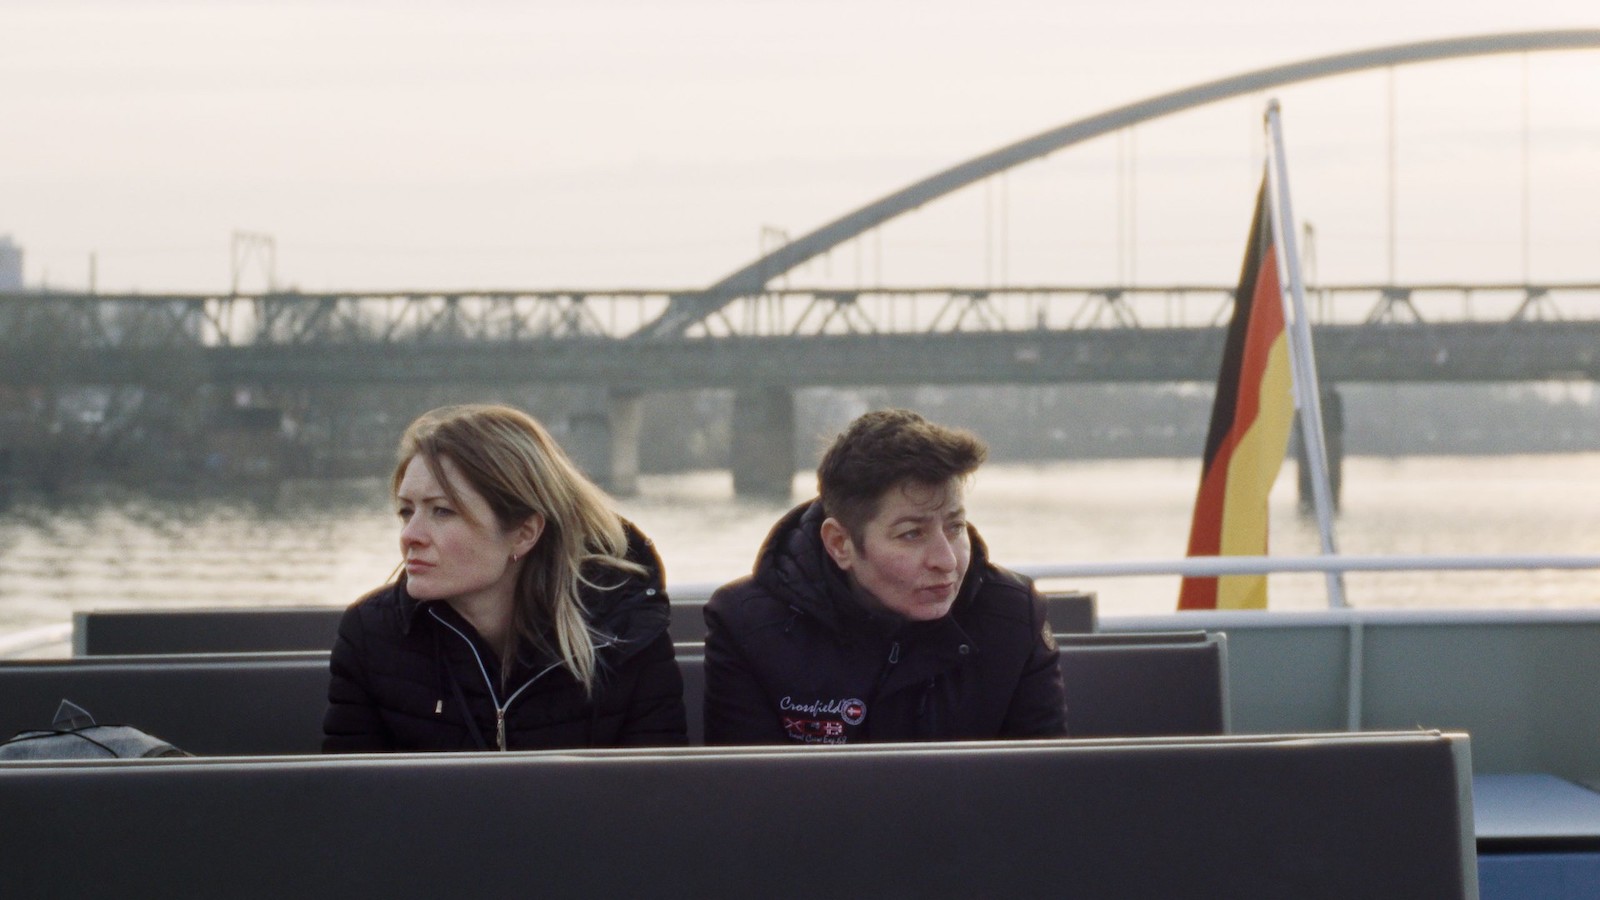 Two women sit on a ferry, huddled in the cold, a bridge in the background